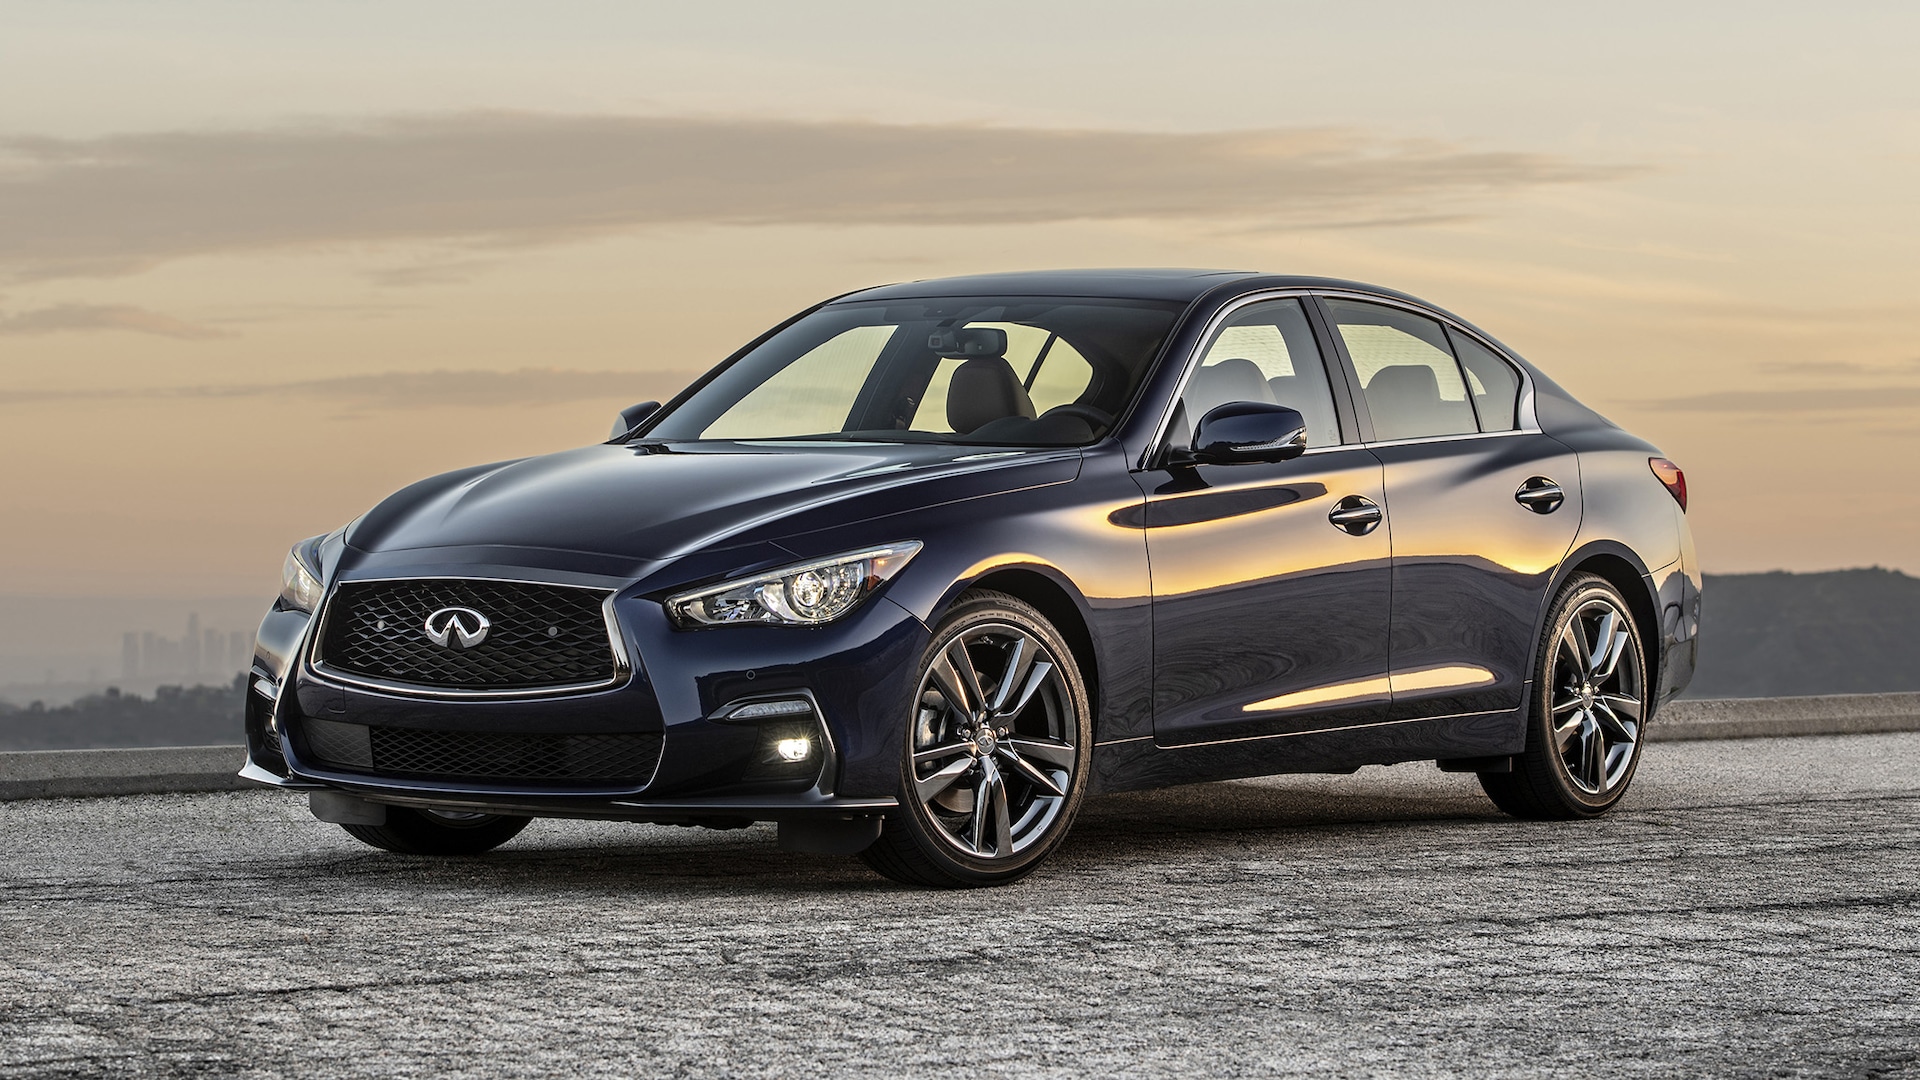 2022 Infiniti Q50 Prices, Reviews, and Photos - MotorTrend